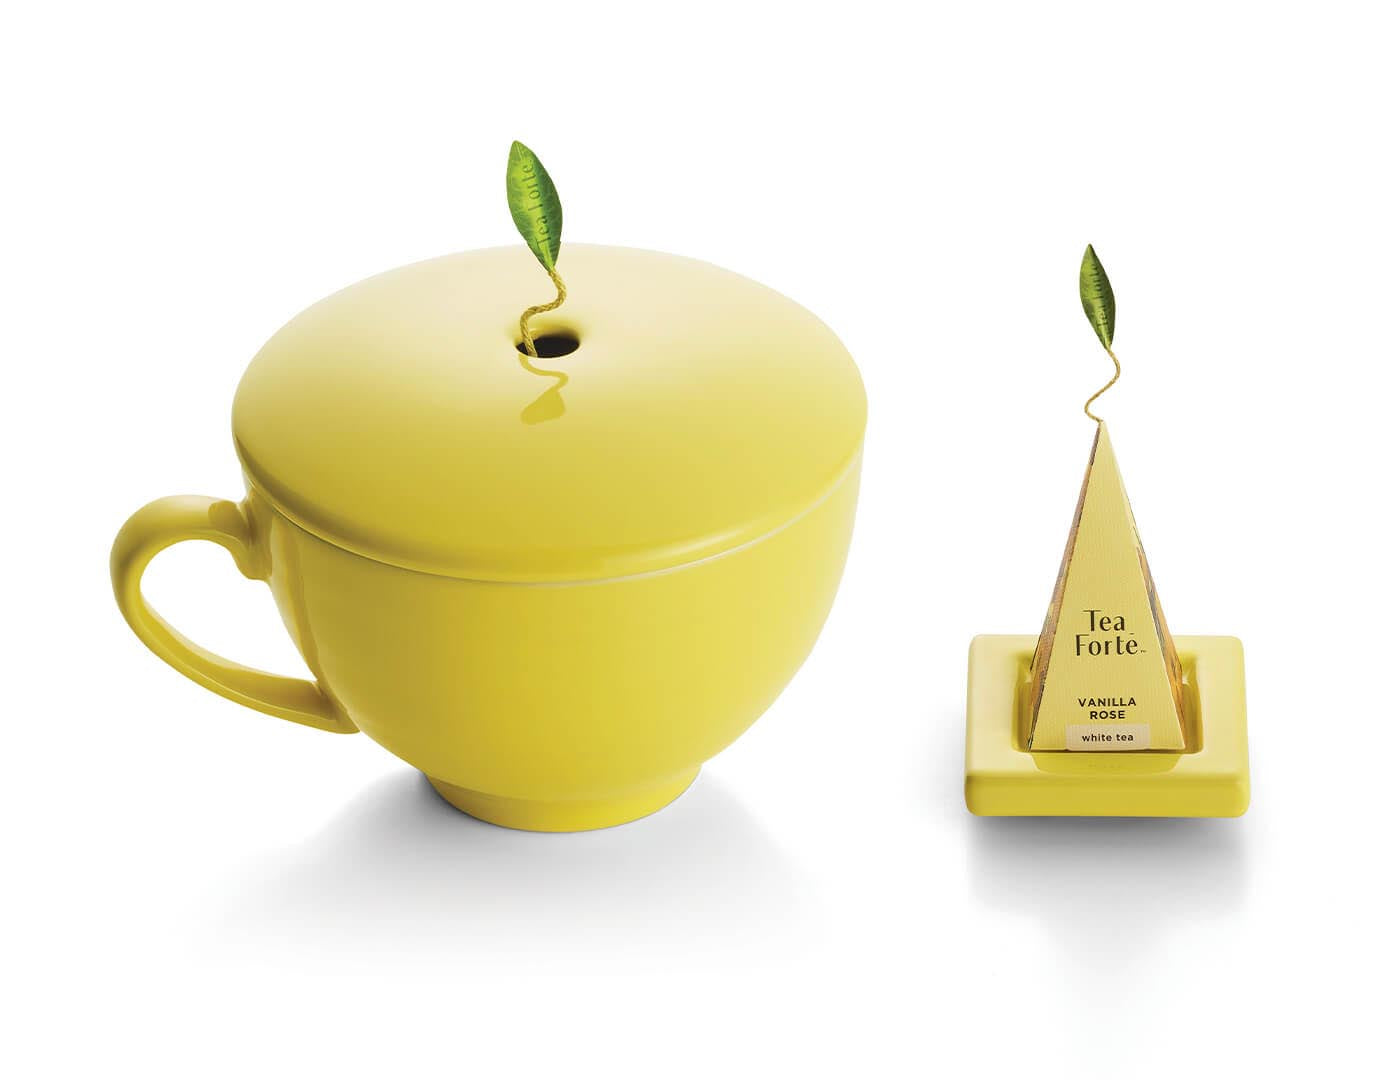 Soleil Collection Gift Set showing porcelain Cafe Cup in yellow with infuser tray